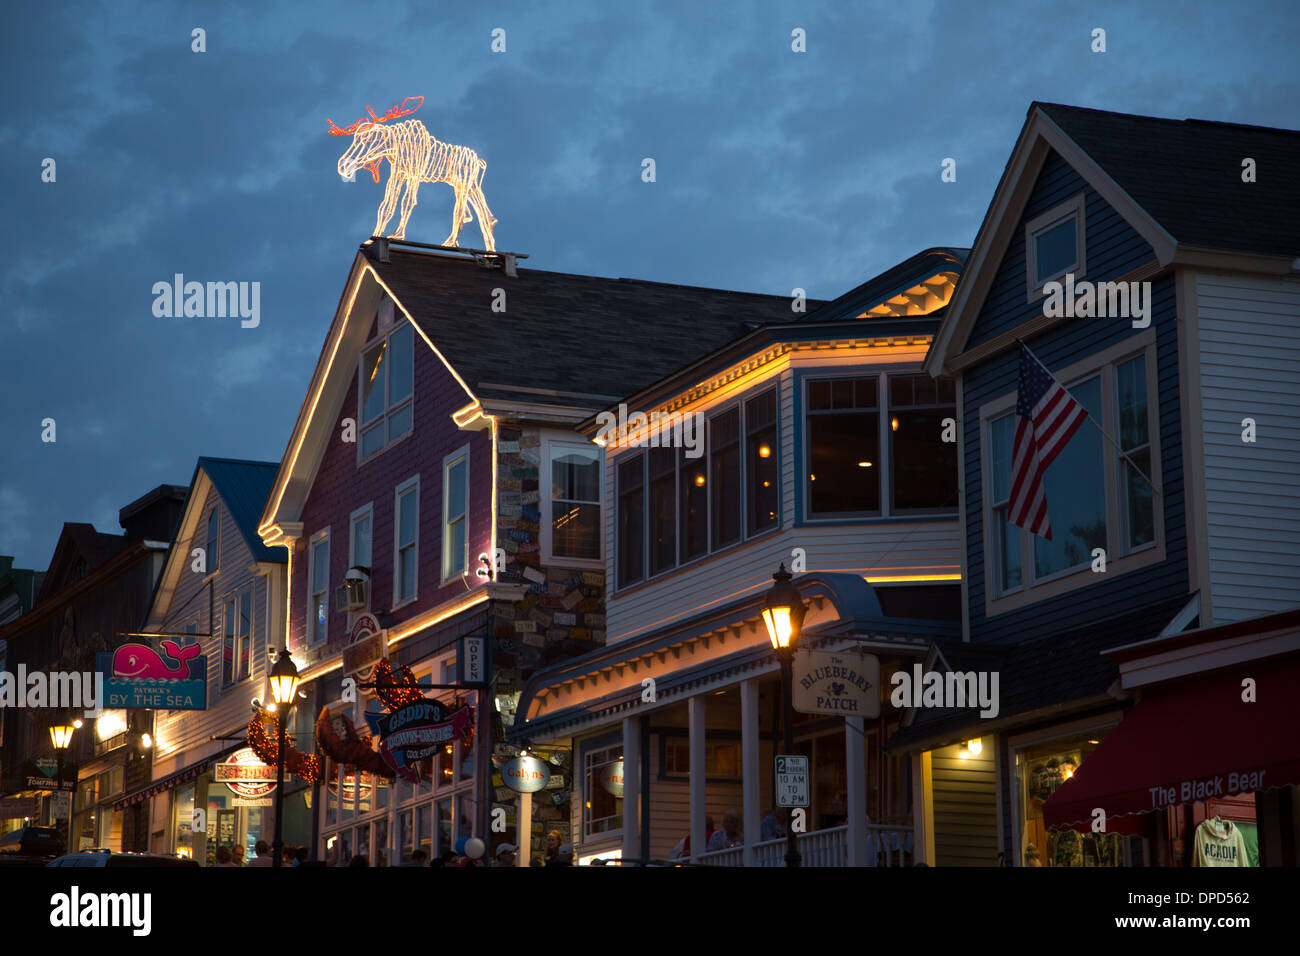 A large illuminated moose on the roof of shops in Bar Harbor, Maine USA - just outside of Acadia National Park Stock Photo